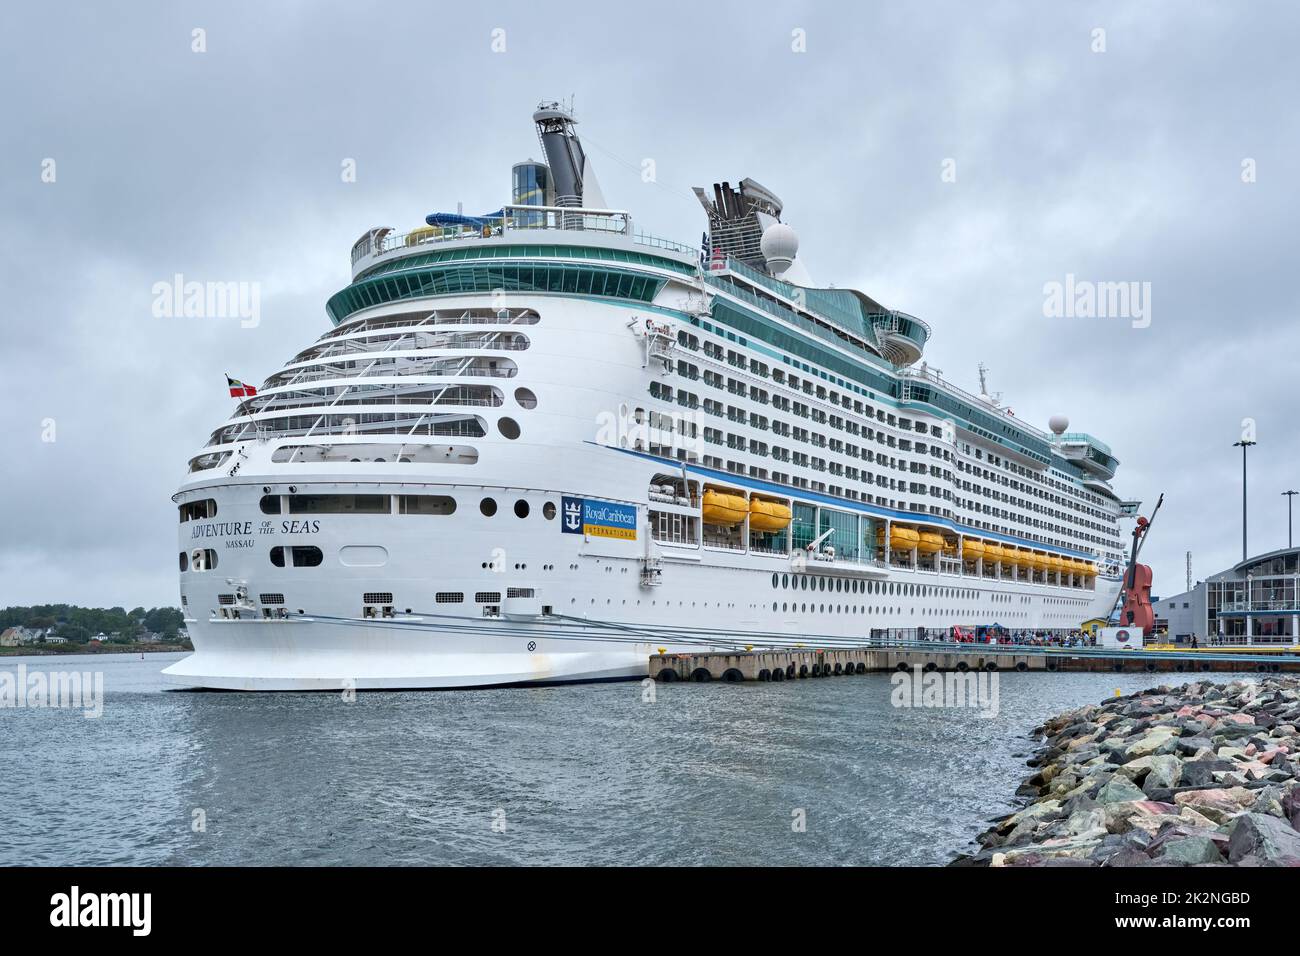 Adventure of the Seas is a Voyager-class cruise ship operated by Royal Caribbean International.  Here the 3807 passenger ship is moored in the harbour Stock Photo